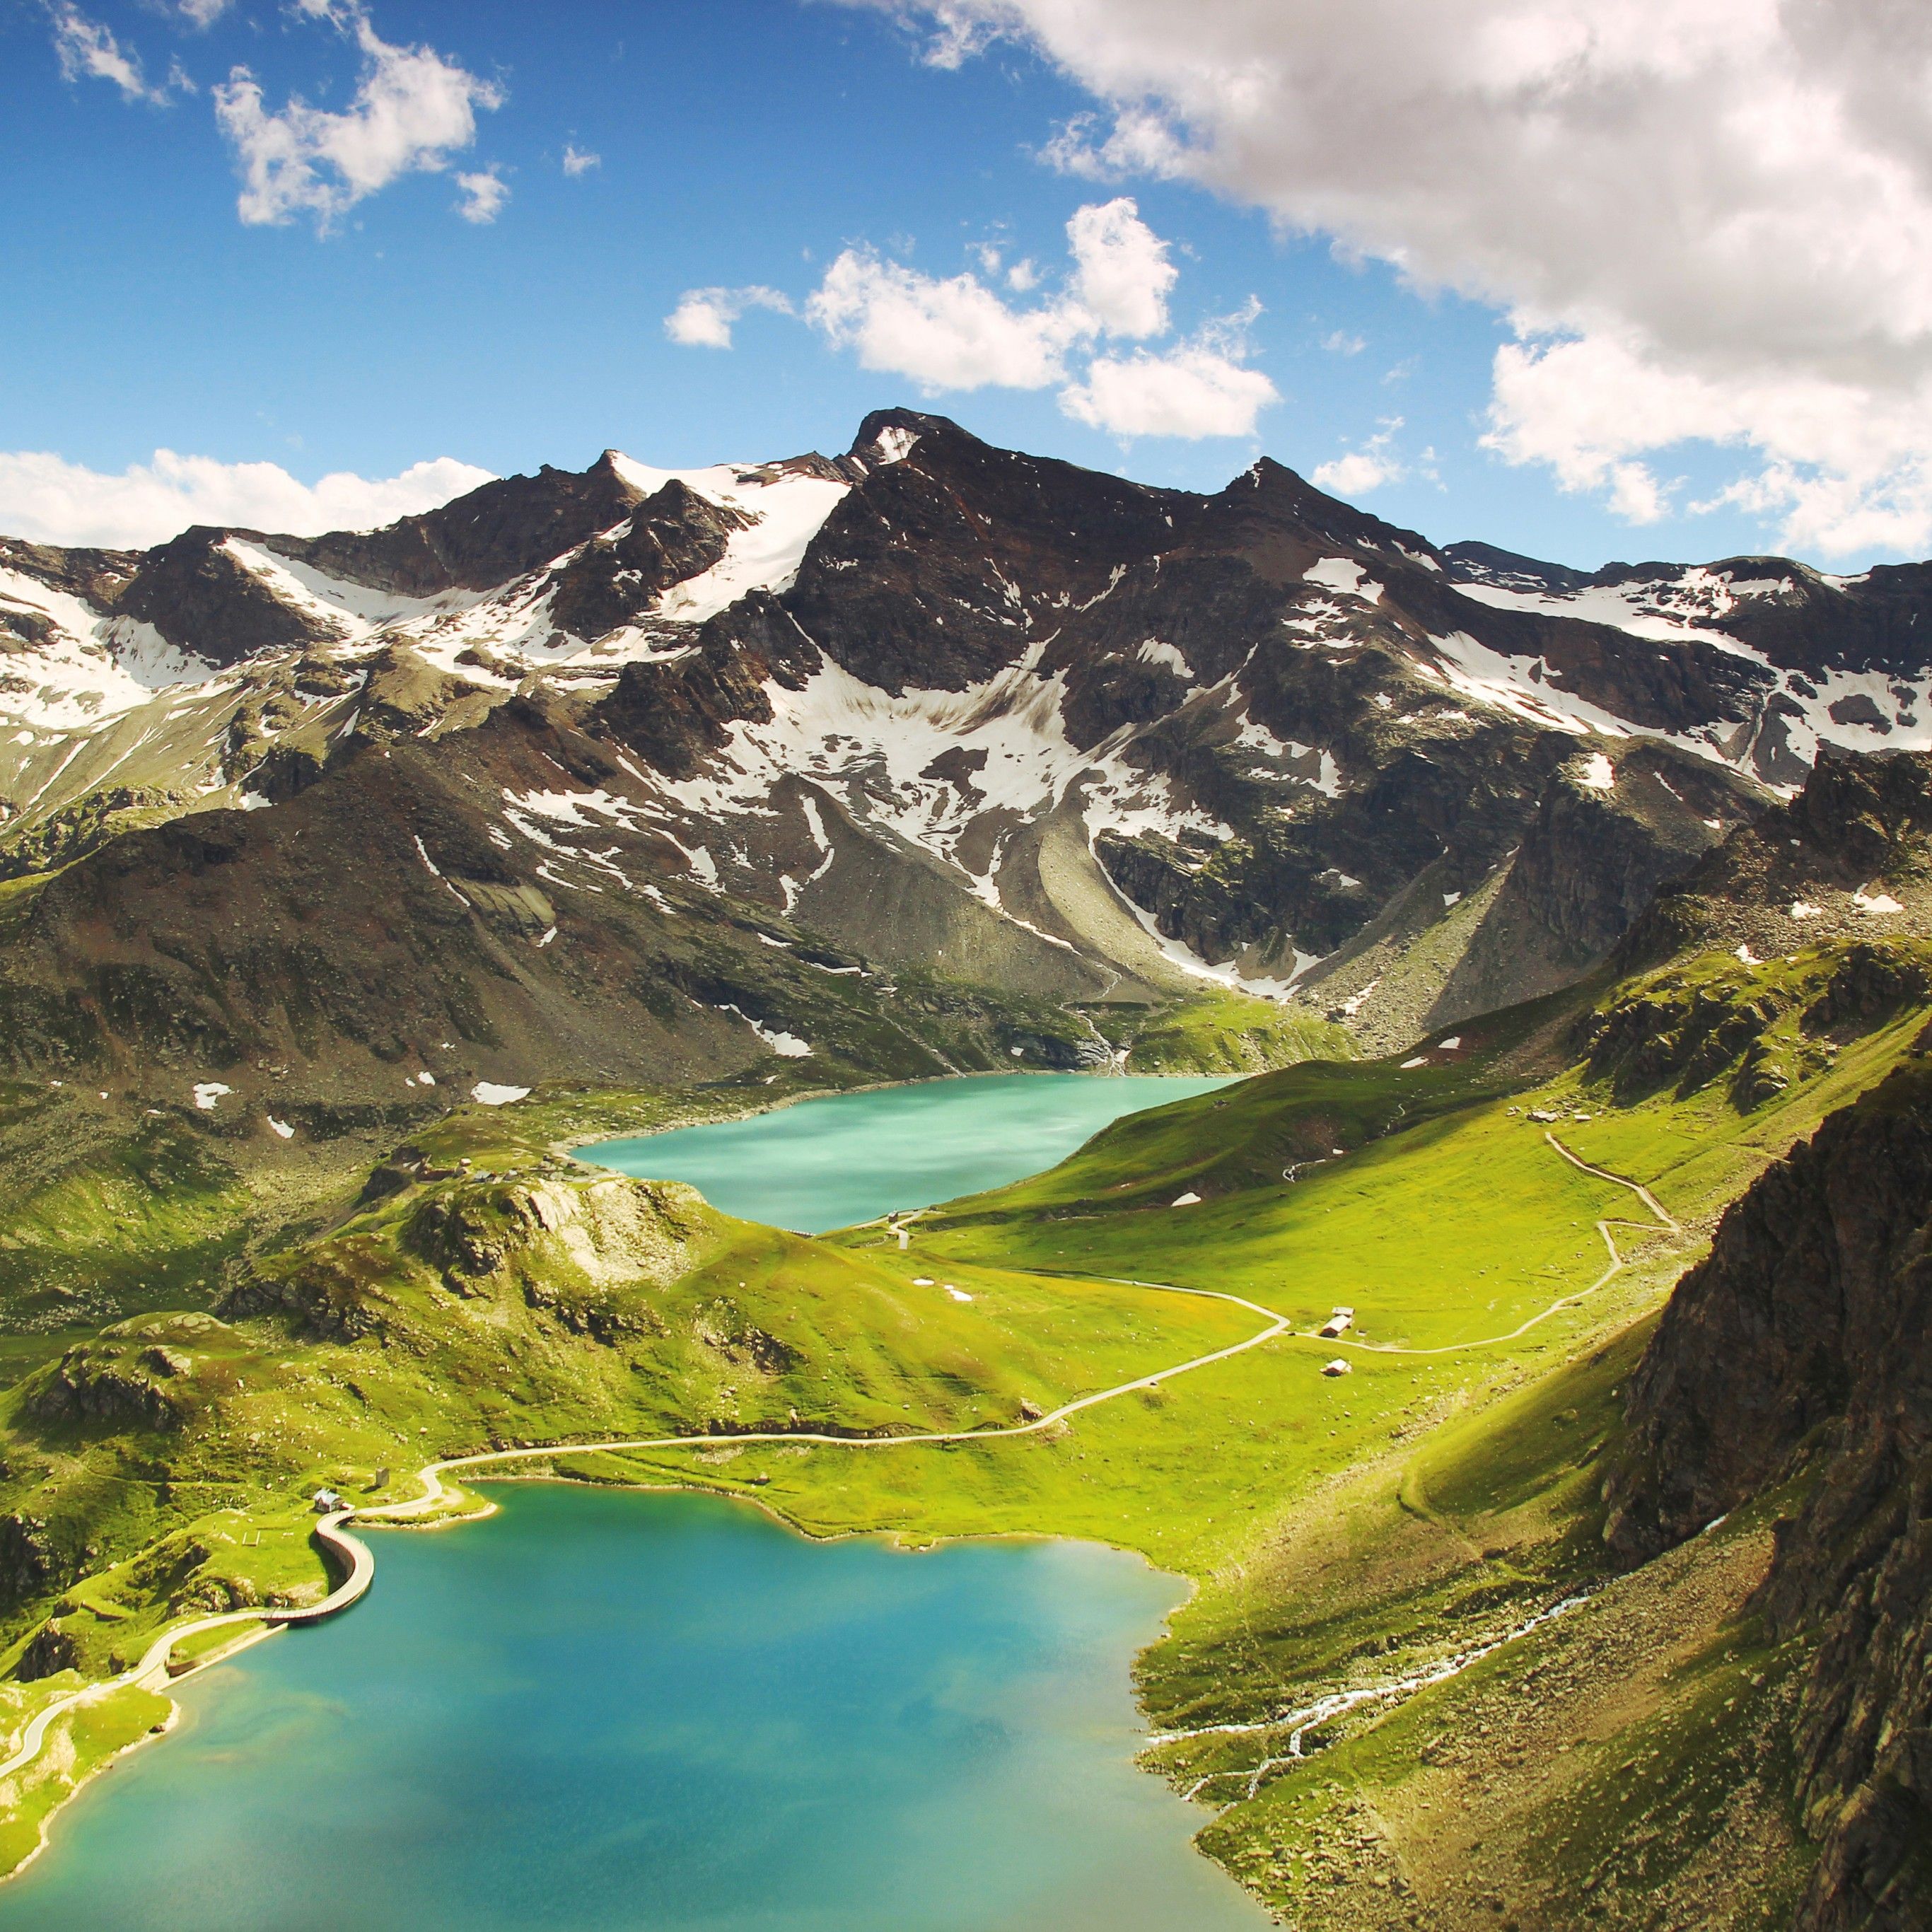 Ceresole Reale 4K Wallpaper, Summer, Mountains, Lake, Sunny day, Landscape, Italy, 5K, Nature